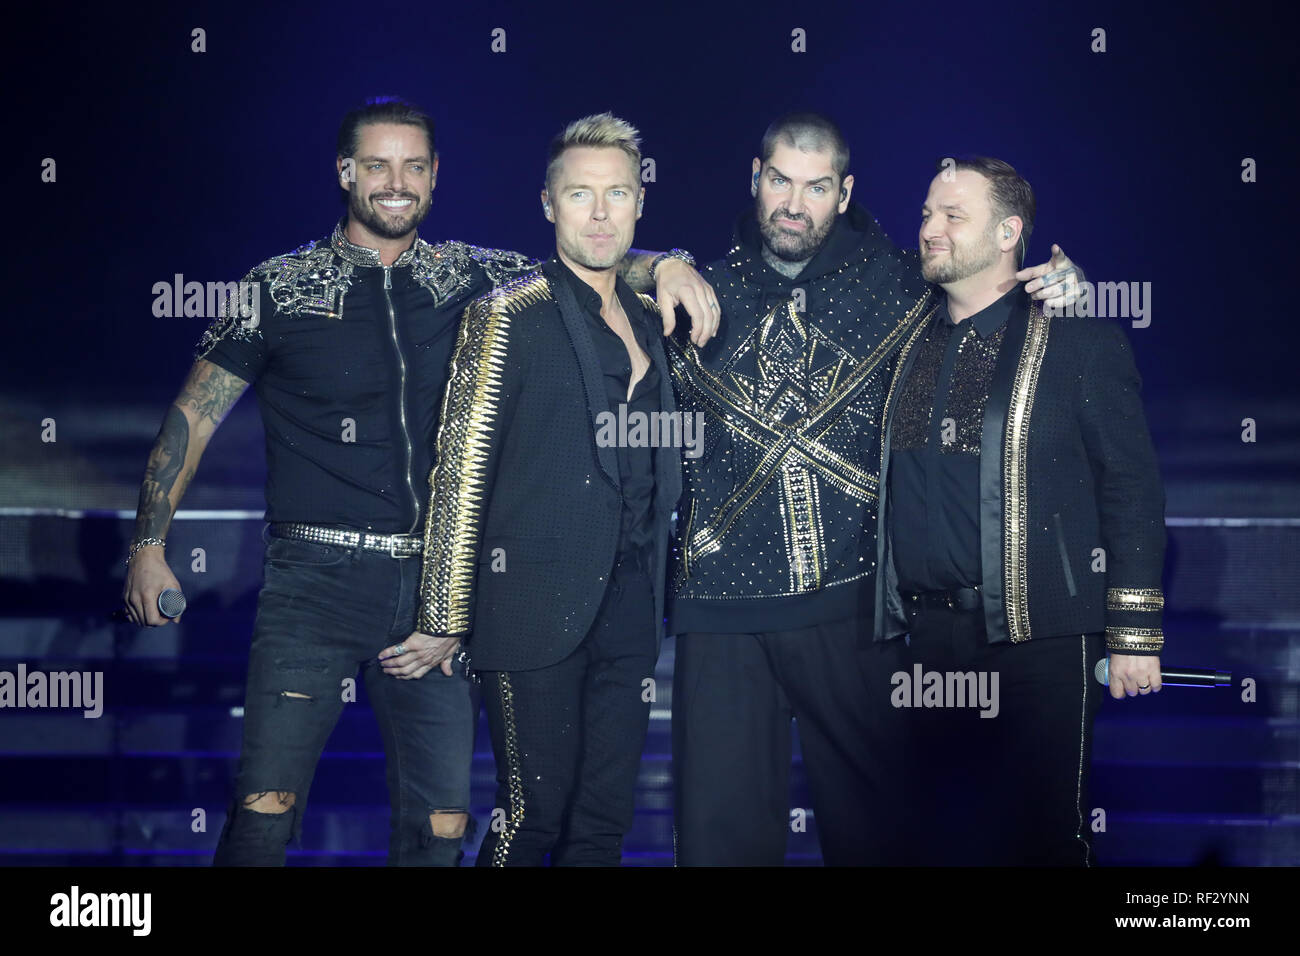 left right) Duffy, Ronan Keating, Shane Lynch and Mikey Graham of Boyzone on stage at the SSE Arena, Belfast, as part of the band's Thank You & Goodnight farewell tour